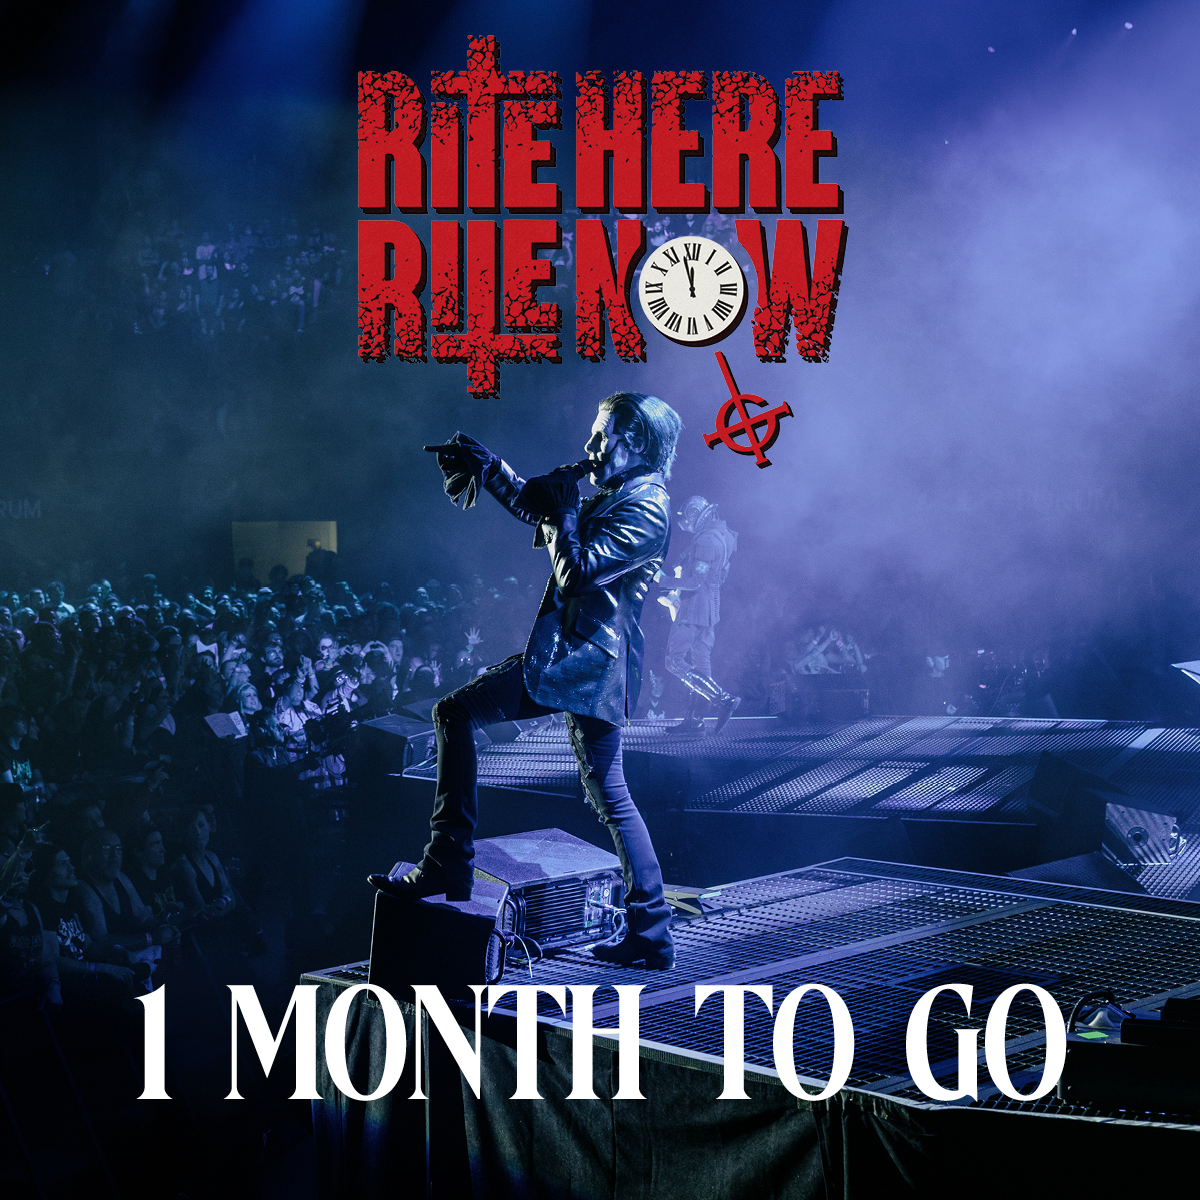 [MESSAGE FROM THE CLERGY]

We wish to inform you that RITE HERE RITE NOW will be haunting cinemas worldwide in one month. Screening June 20, 21, 22 and 23. 

Tickets are on sale, visit ritehereritenow.com for more information.

#RiteHereRiteNow